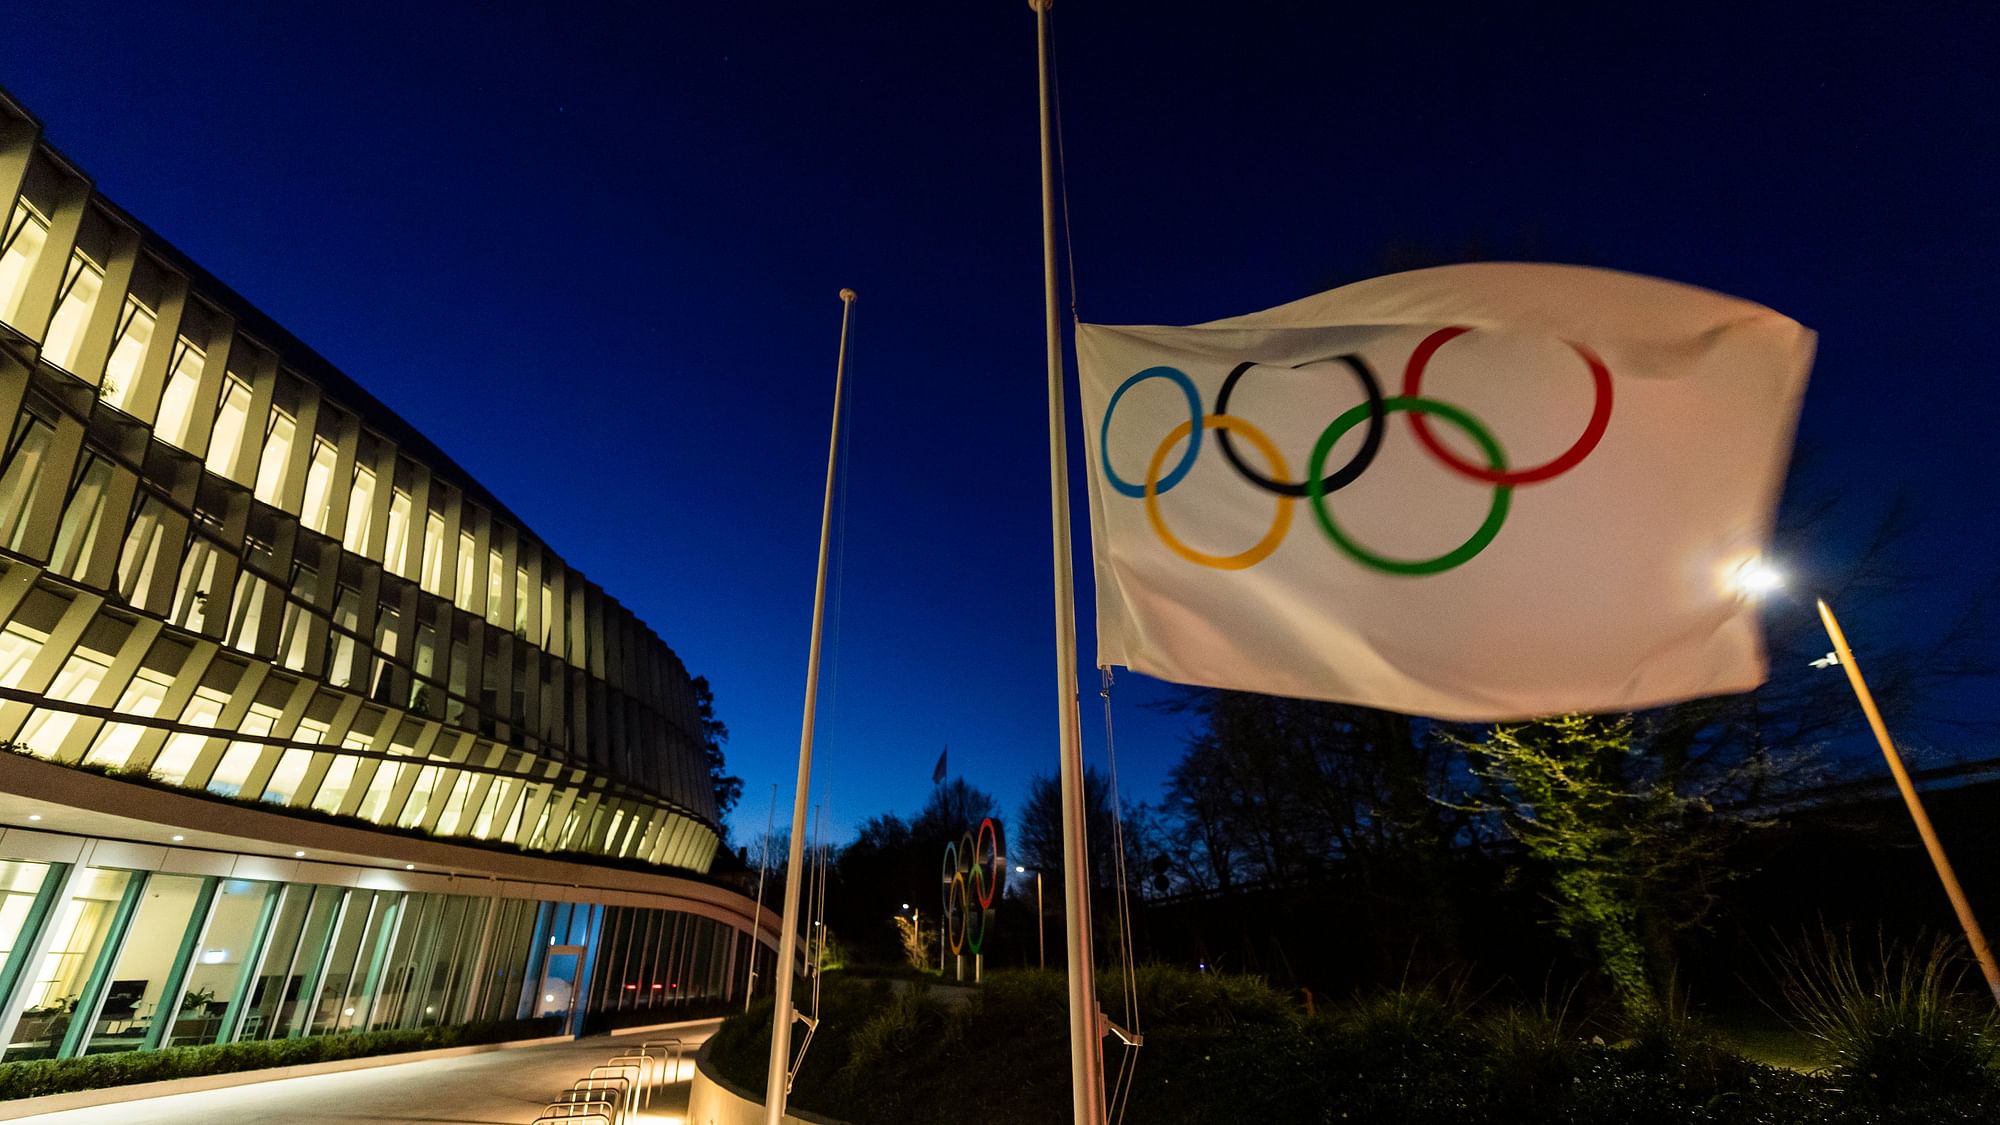 An IOC member told USA Today that the 2020 Tokyo Olympics are being postponed.